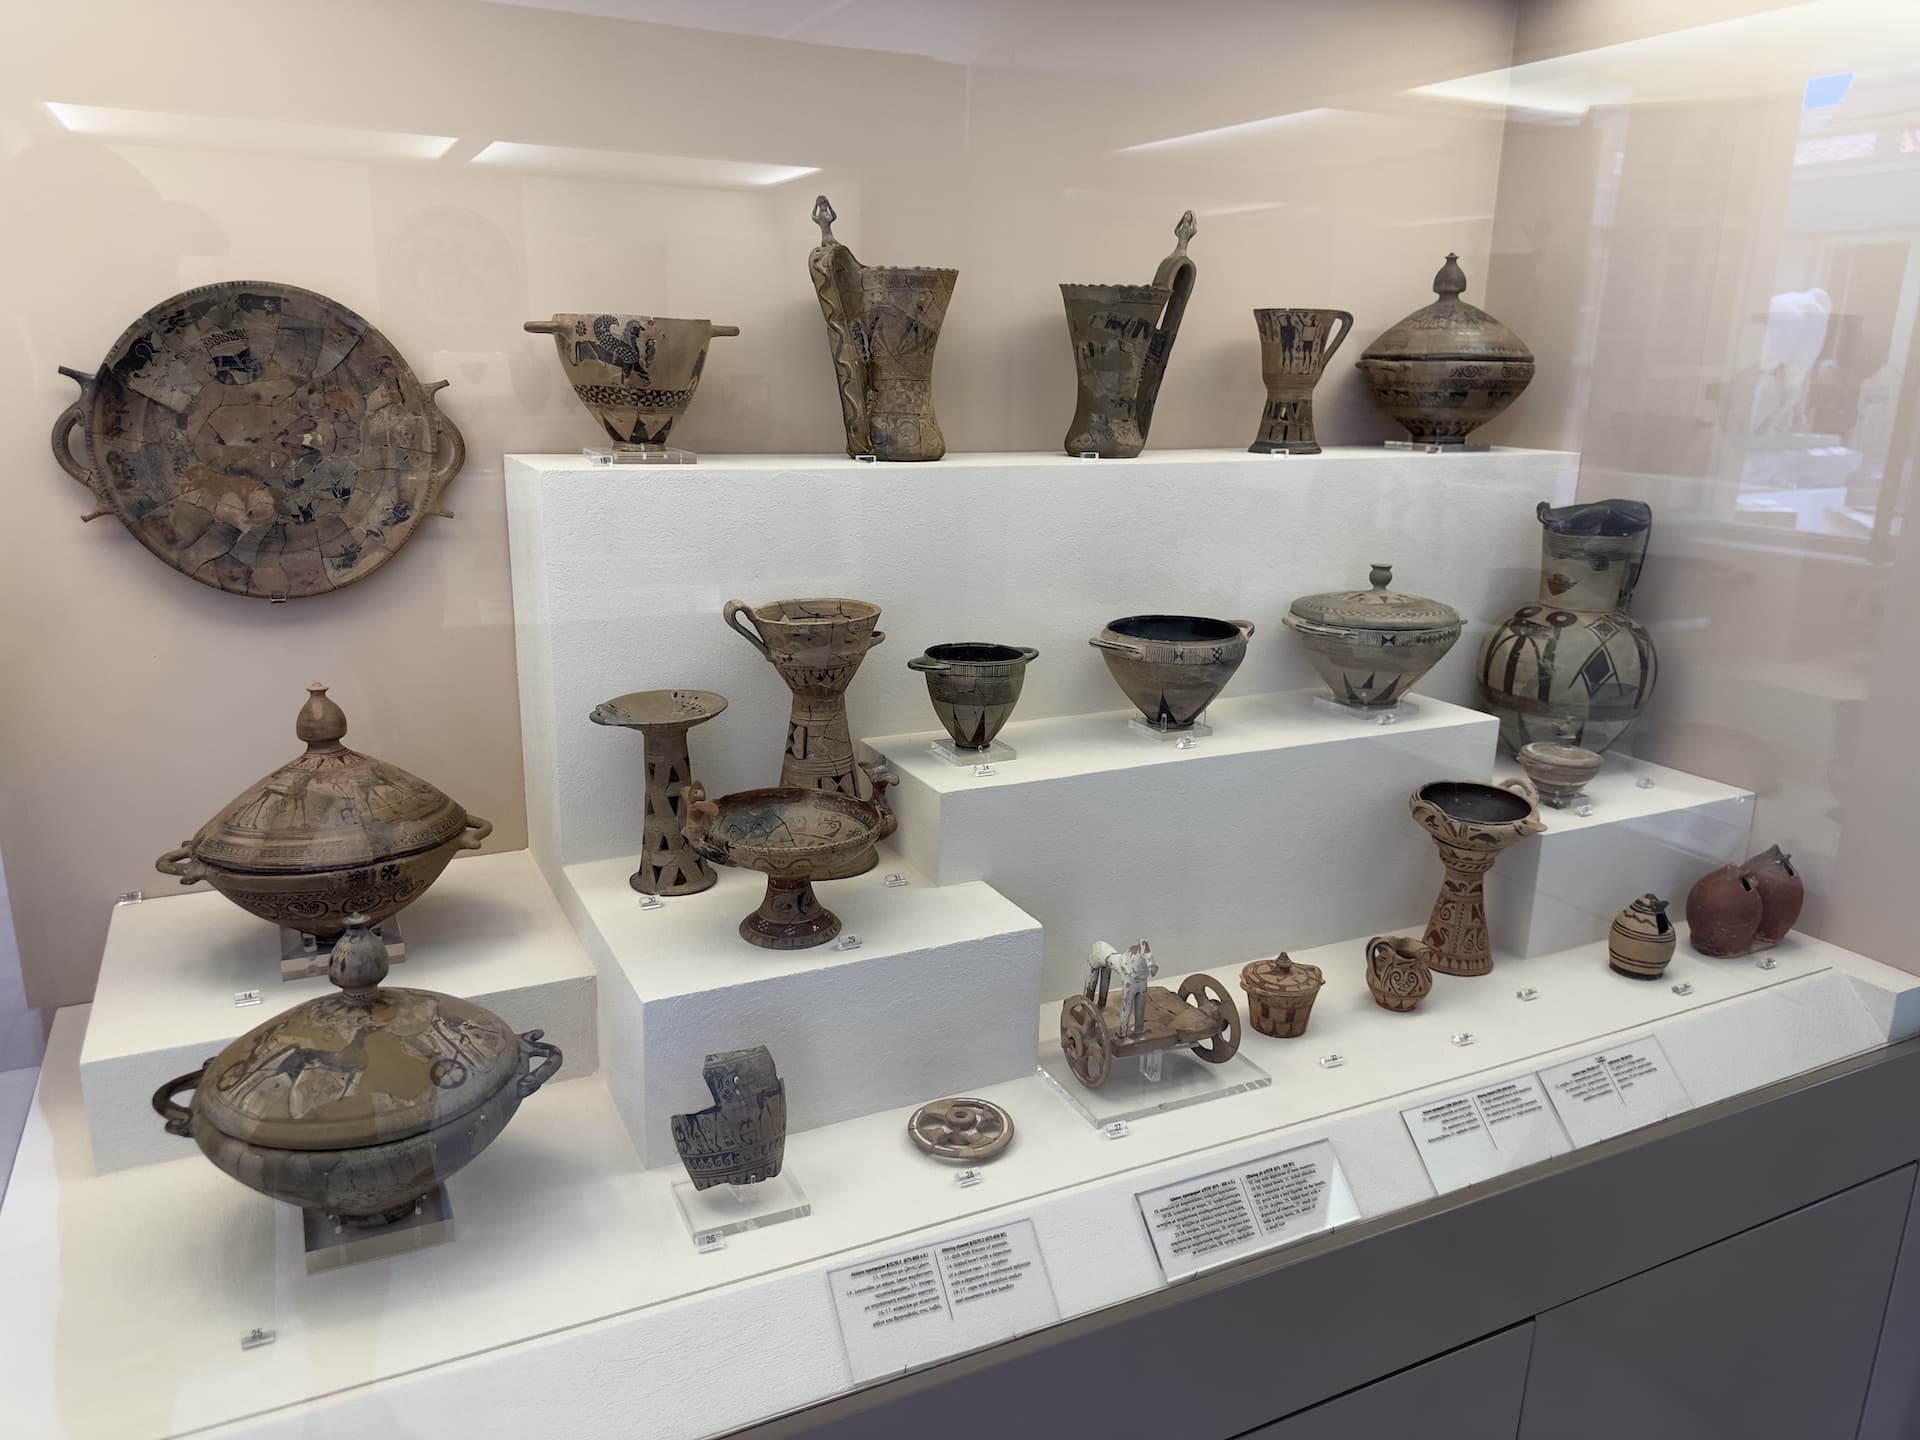 Ceramics from 675 to 650 BC